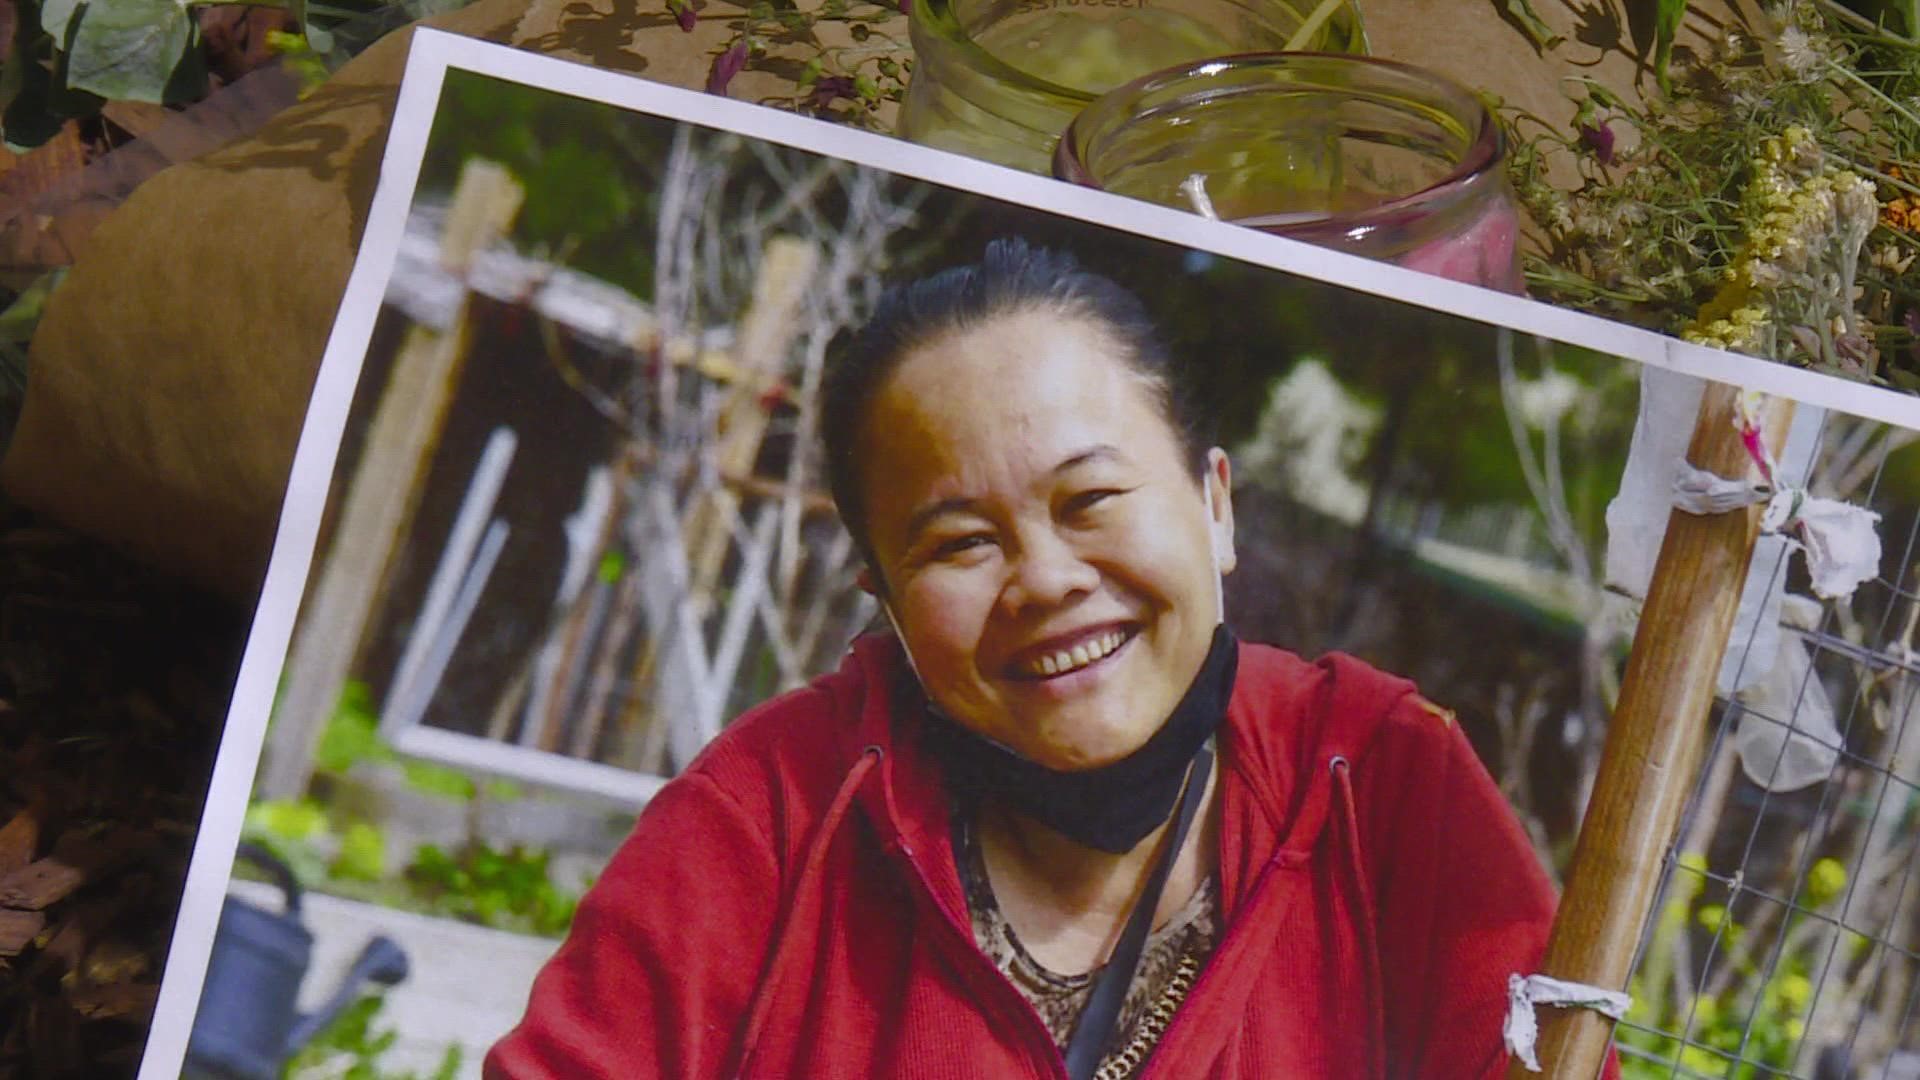 Ma Kaing was a board member of the East Colfax Neighborhood Association. She was shot in front of the apartments where she'd lived for 15 years.